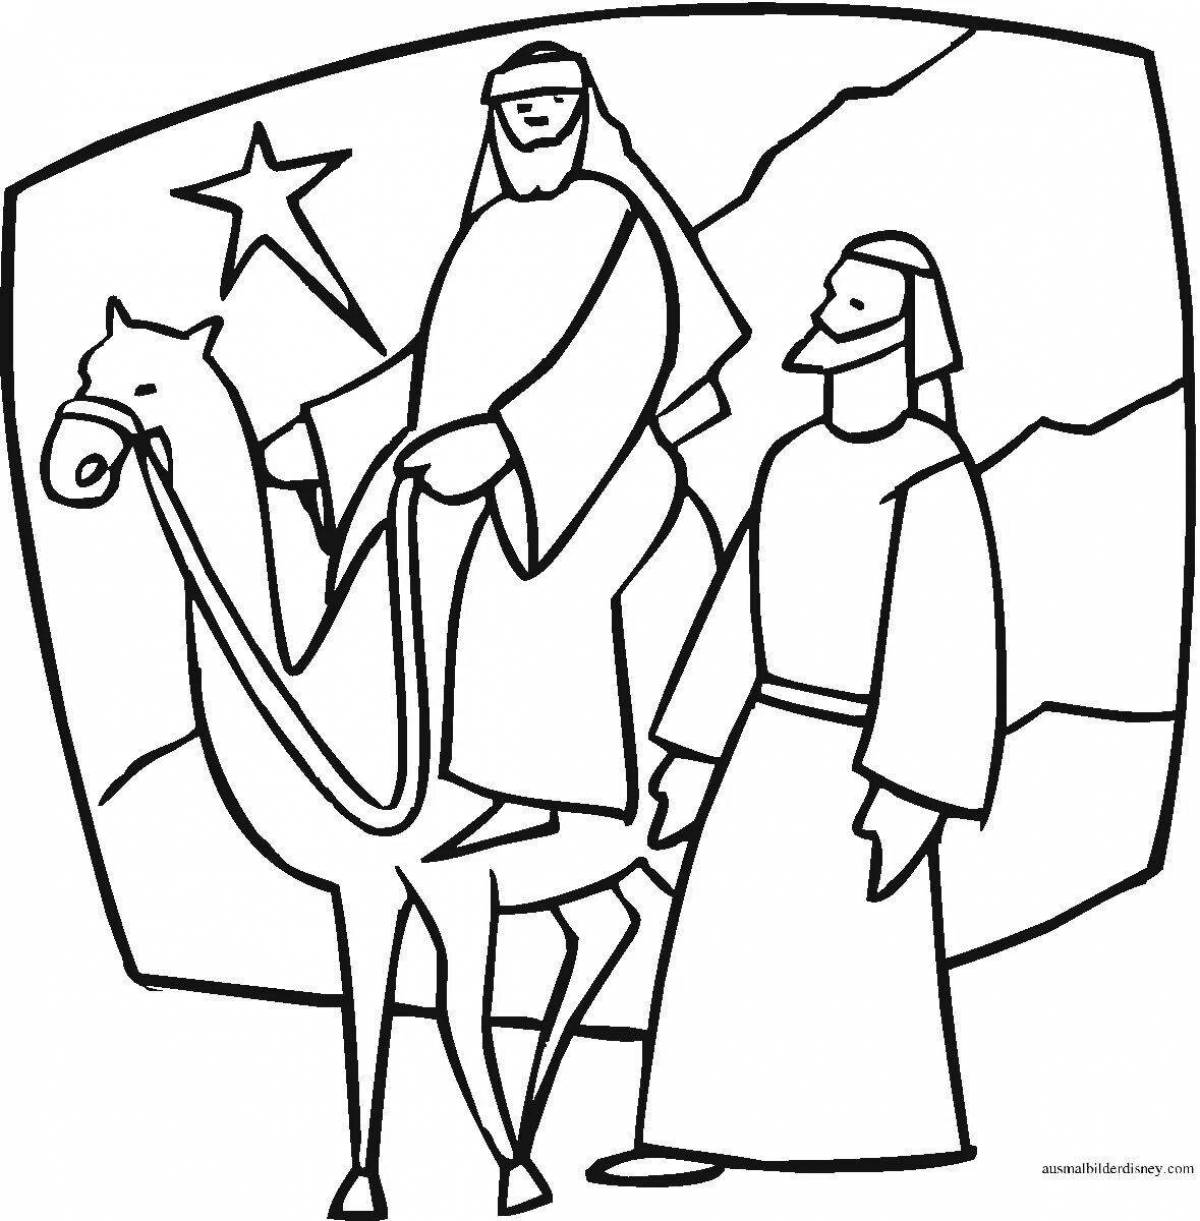 Charming star of Bethlehem coloring pages for kids